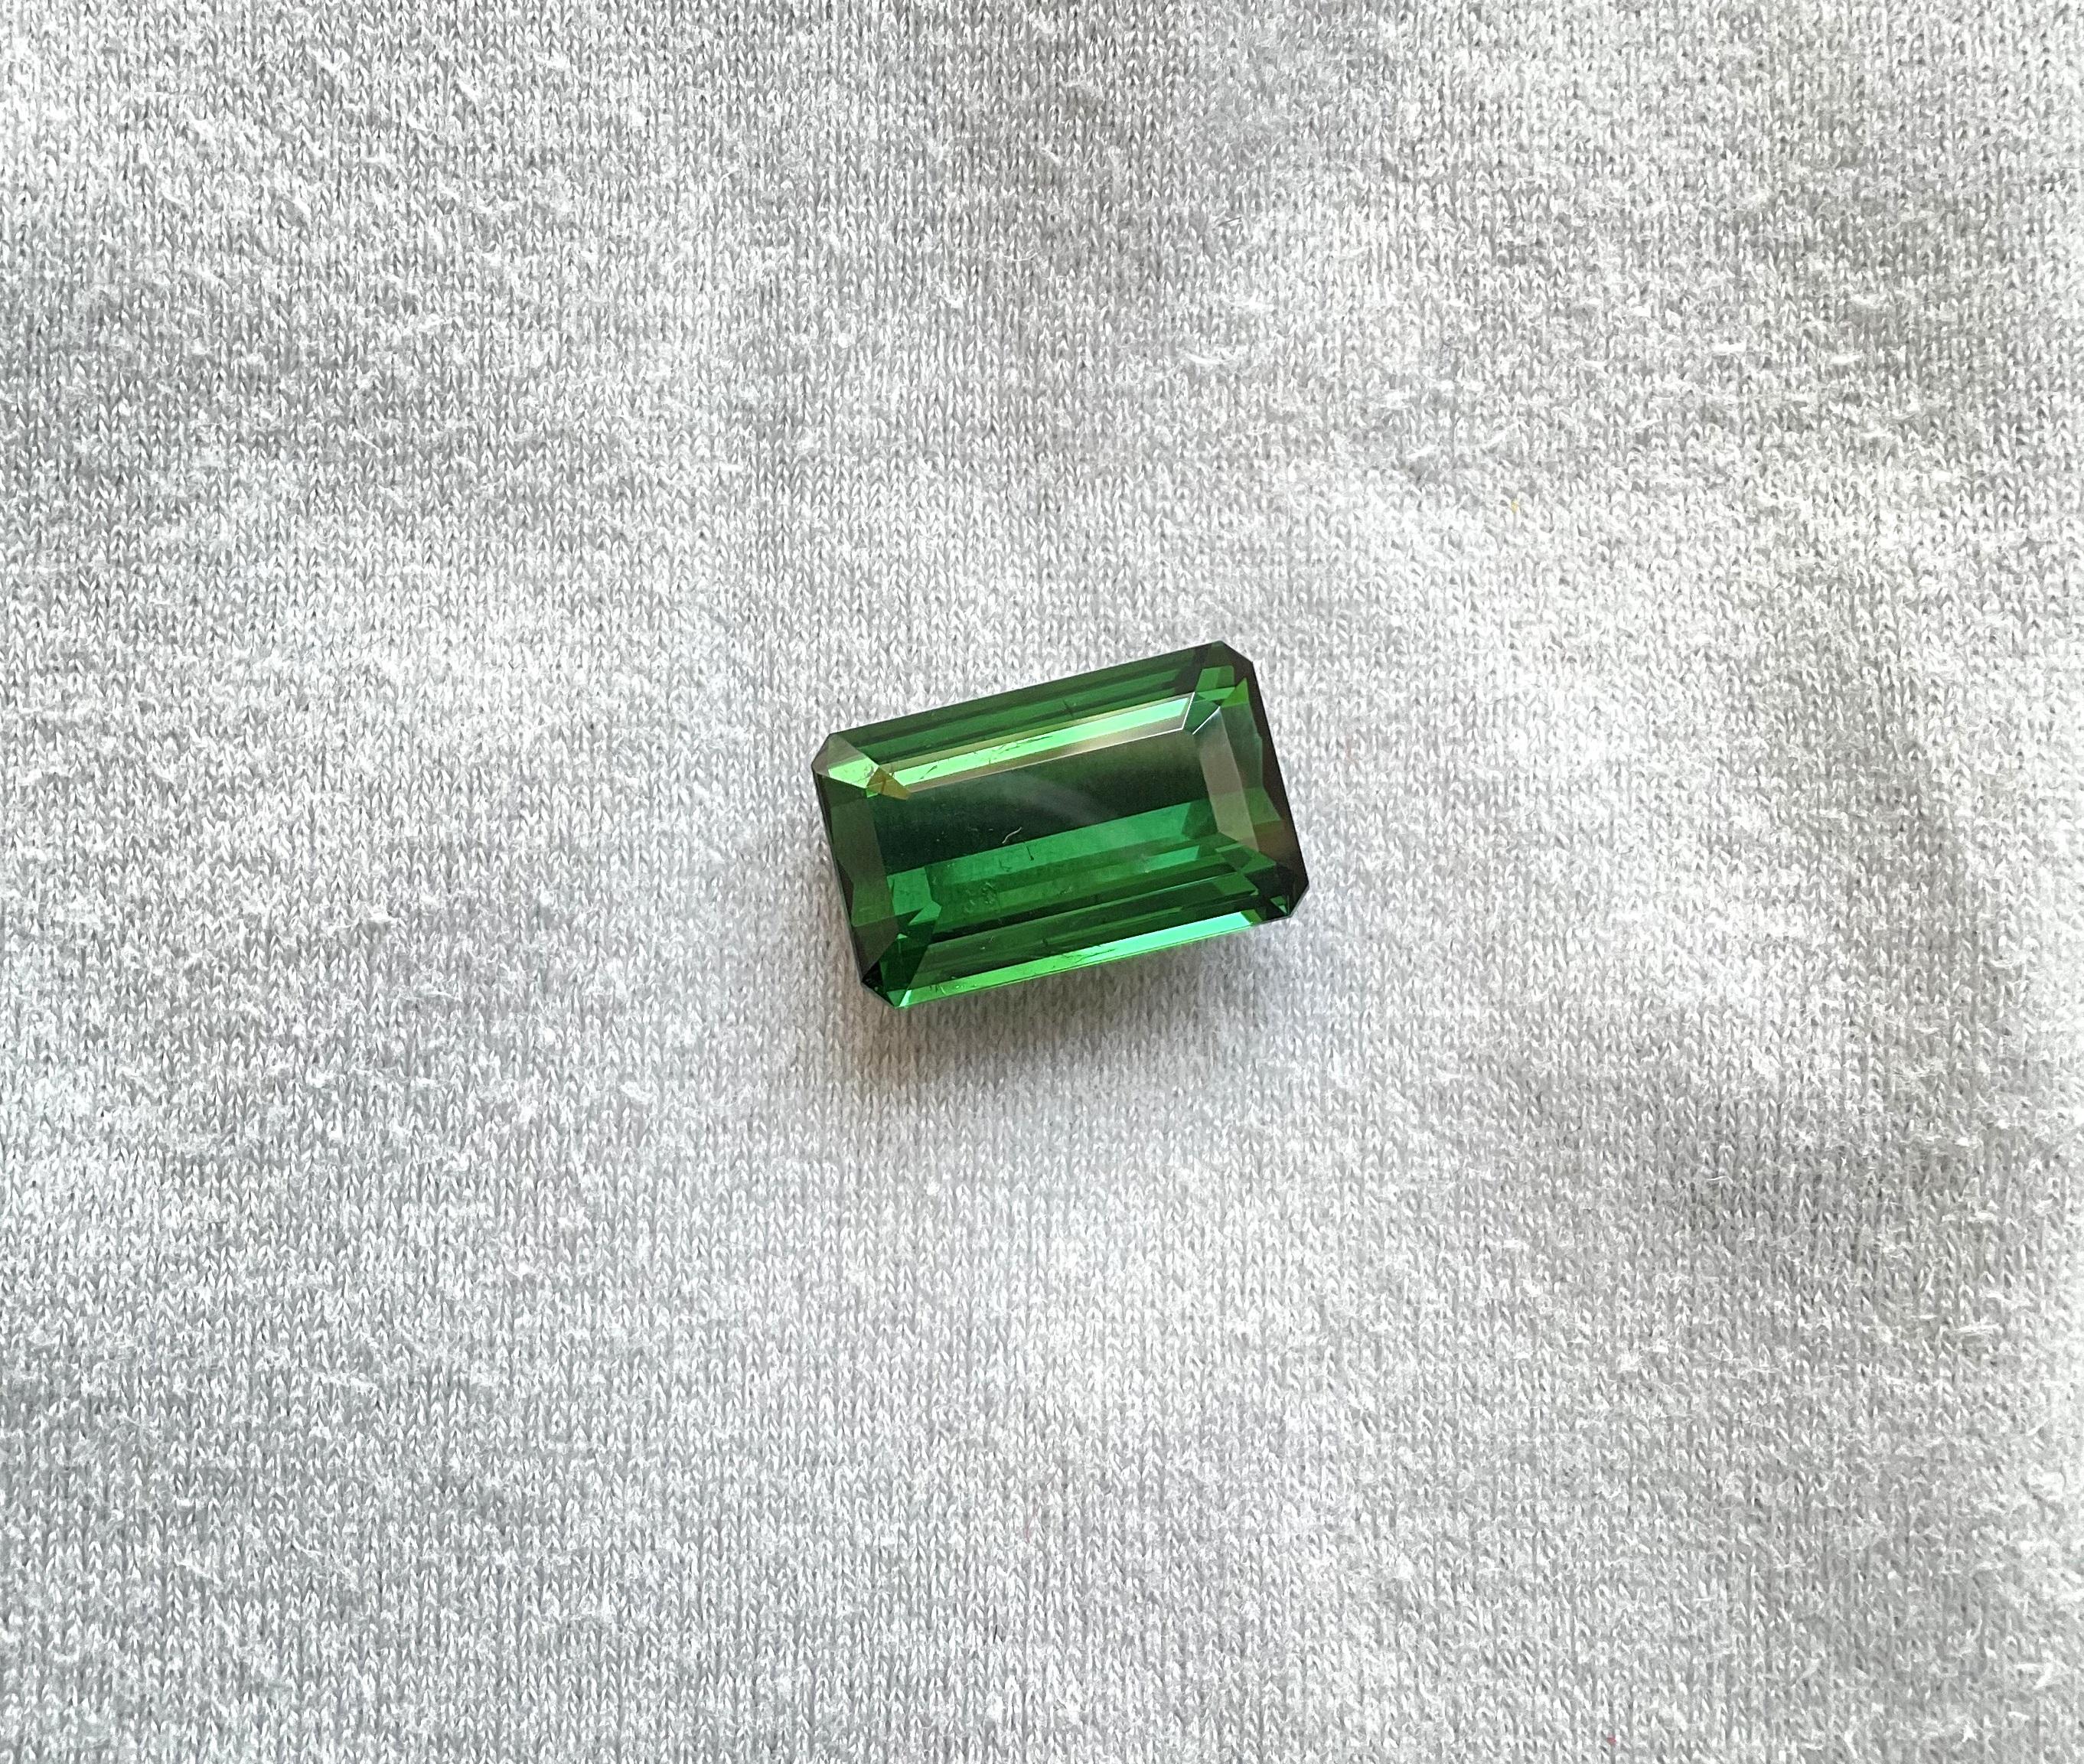 14.46 carats Nigeria green tourmaline Top Quality Octagon Cut stone natural Gem In New Condition For Sale In Jaipur, RJ